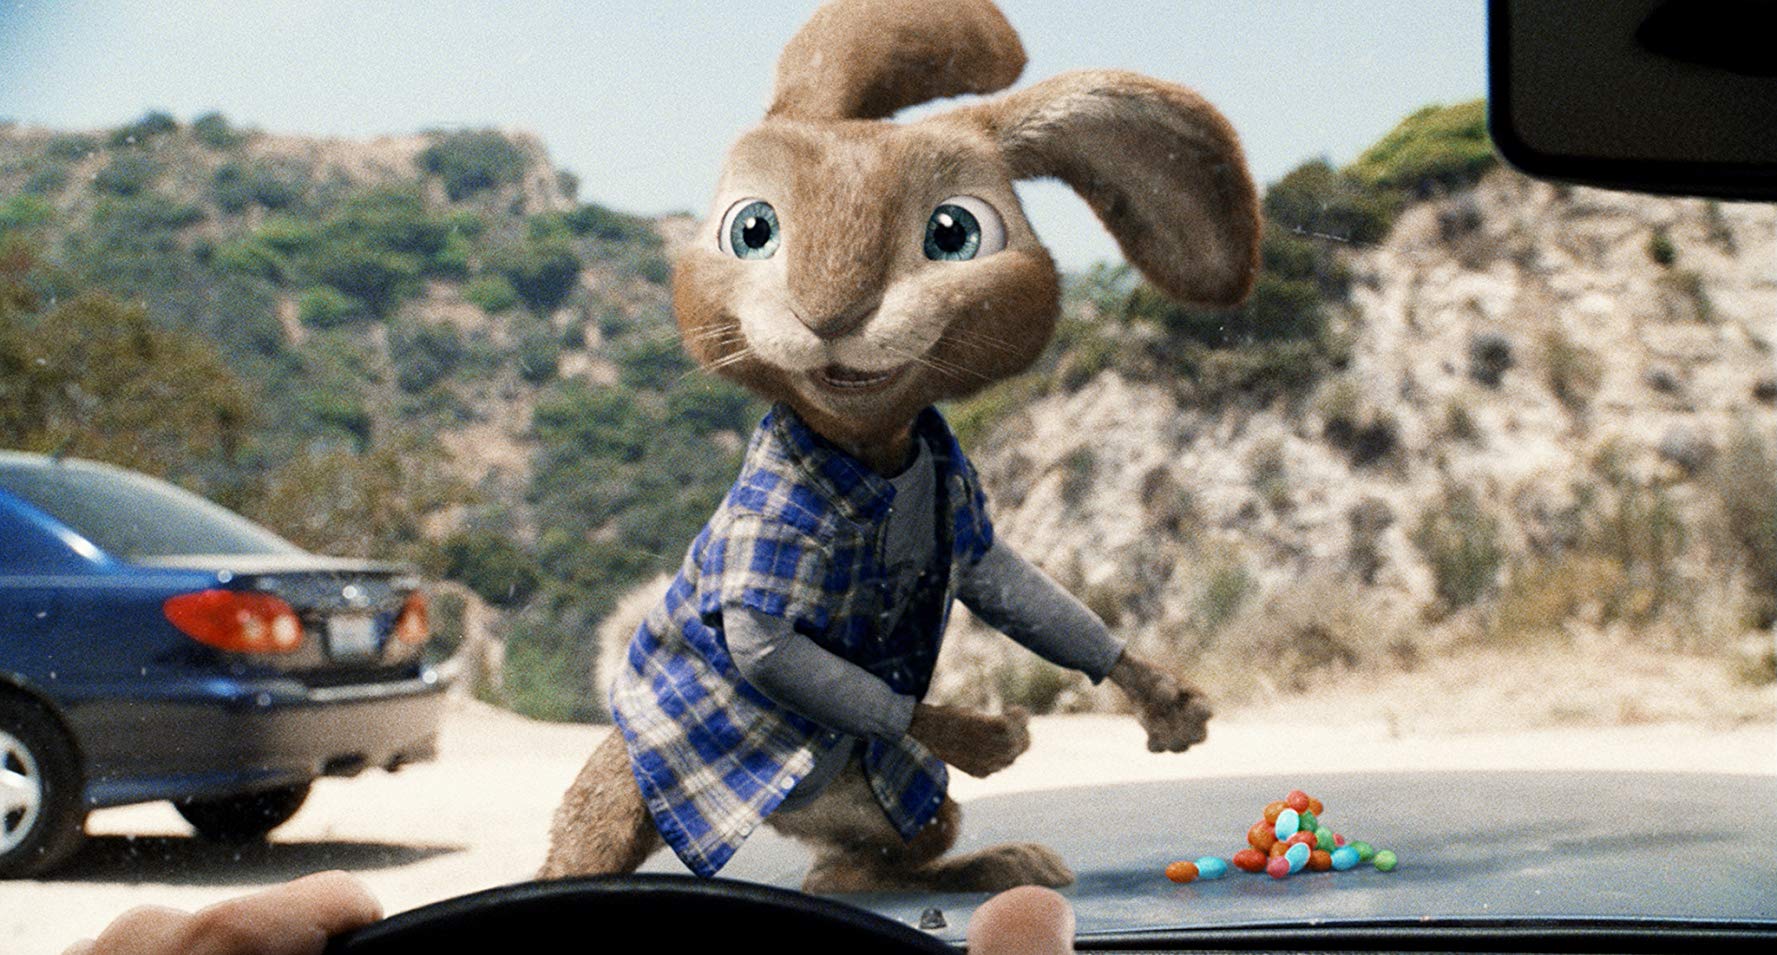 E.B., the son of the Easter Bunny, in Hop (2011)